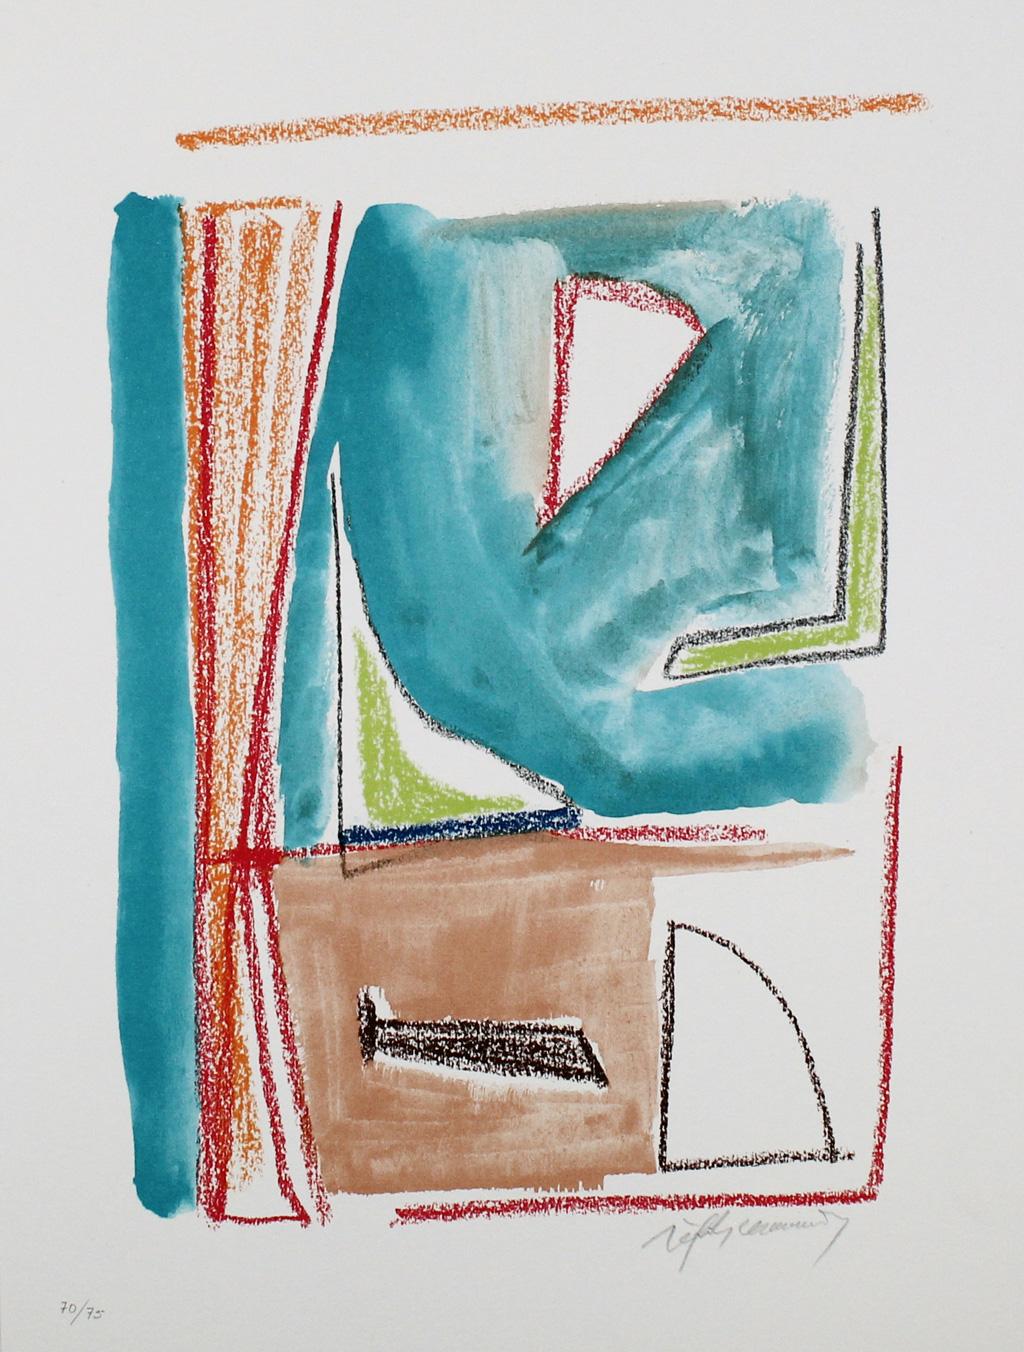 Albert Rafols Casamada - ESTRUCTURES 2
Date of creation: 2006
Medium: Lithograph on paper
Edition: 75
Size: 41 x 31 cm
Observations:
Condition: In very good conditions and never framed
Lithograph on paper signed by the artist and numbered edition of